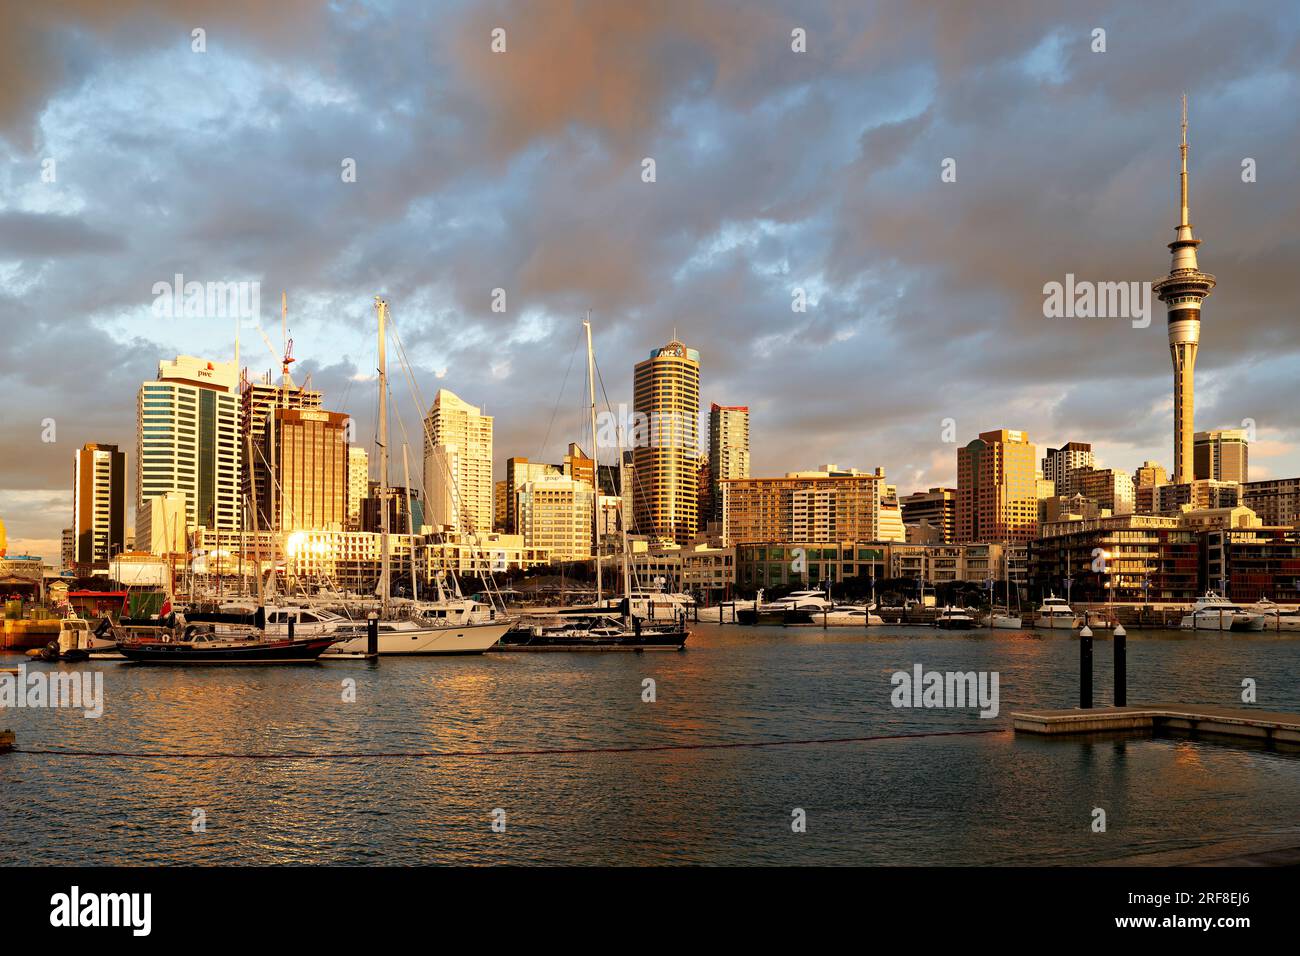 Auckland. New Zealand. The city skyline. View from Viaduct Harbour at sunset Stock Photo